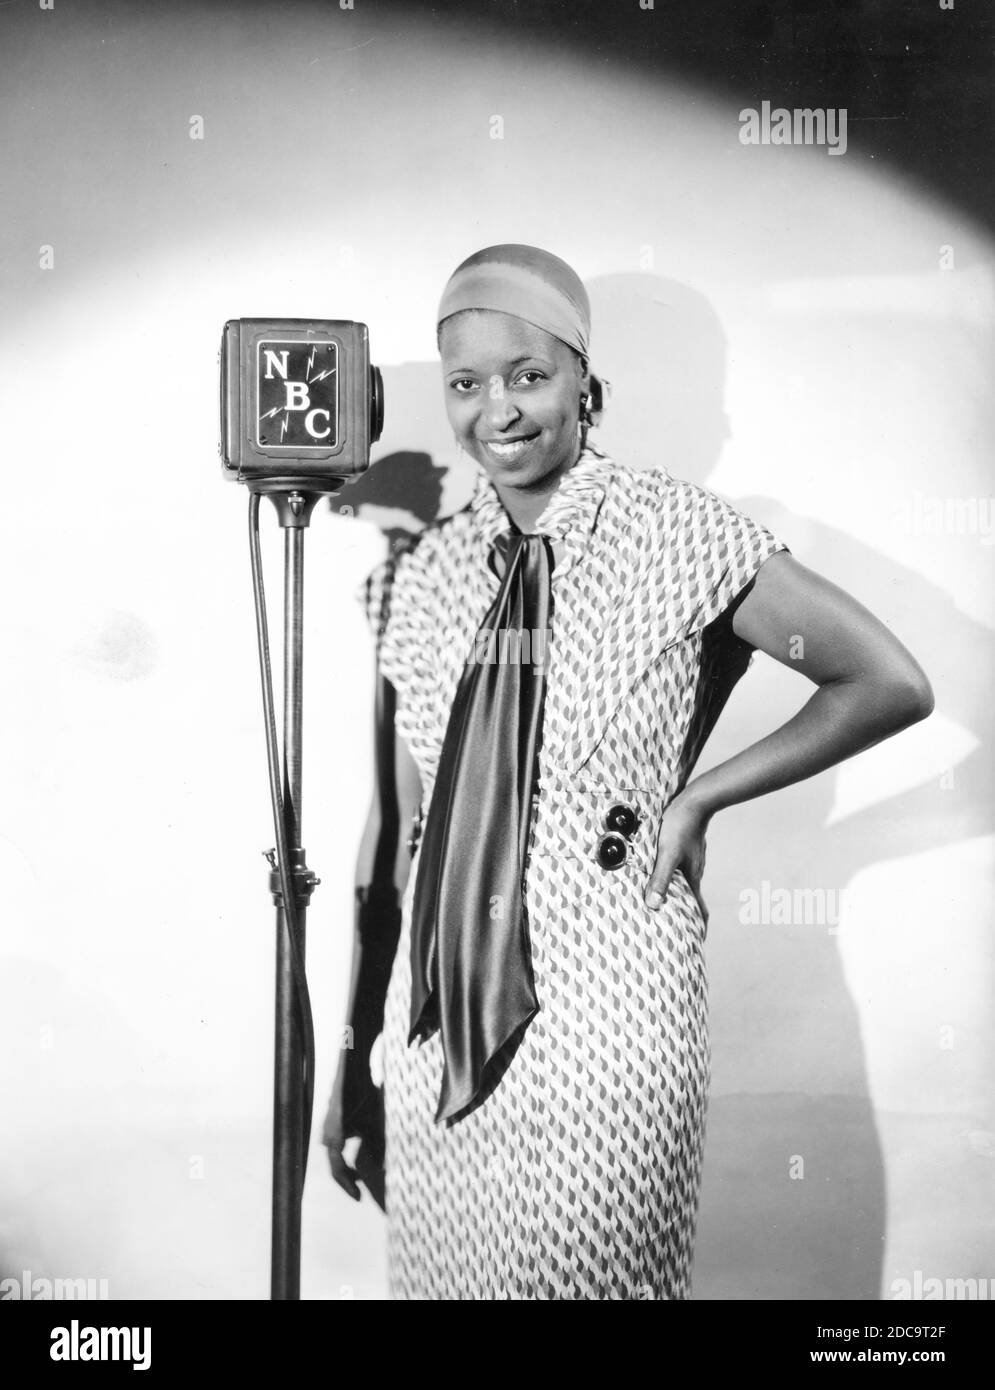 American Blues singer Ethel Waters (1896-1977) poses with an NBC Radio microphone in 1933. Ms. Waters also sang jazz, pop, and swing. She was a very successful actress and was nominated for an Academy Award and a Primetime Emmy Award. The 1933 caption found with this photo says, 'From laundress to the sensational singer of the day for her blues. She is the person who introduced 'Stormy Weather' and made it what it is today. She uses it as her theme song on her broadcasts over the NBC-WJZ network.'    To see my other related images, Search:  Prestor  vintage  music  African Stock Photo